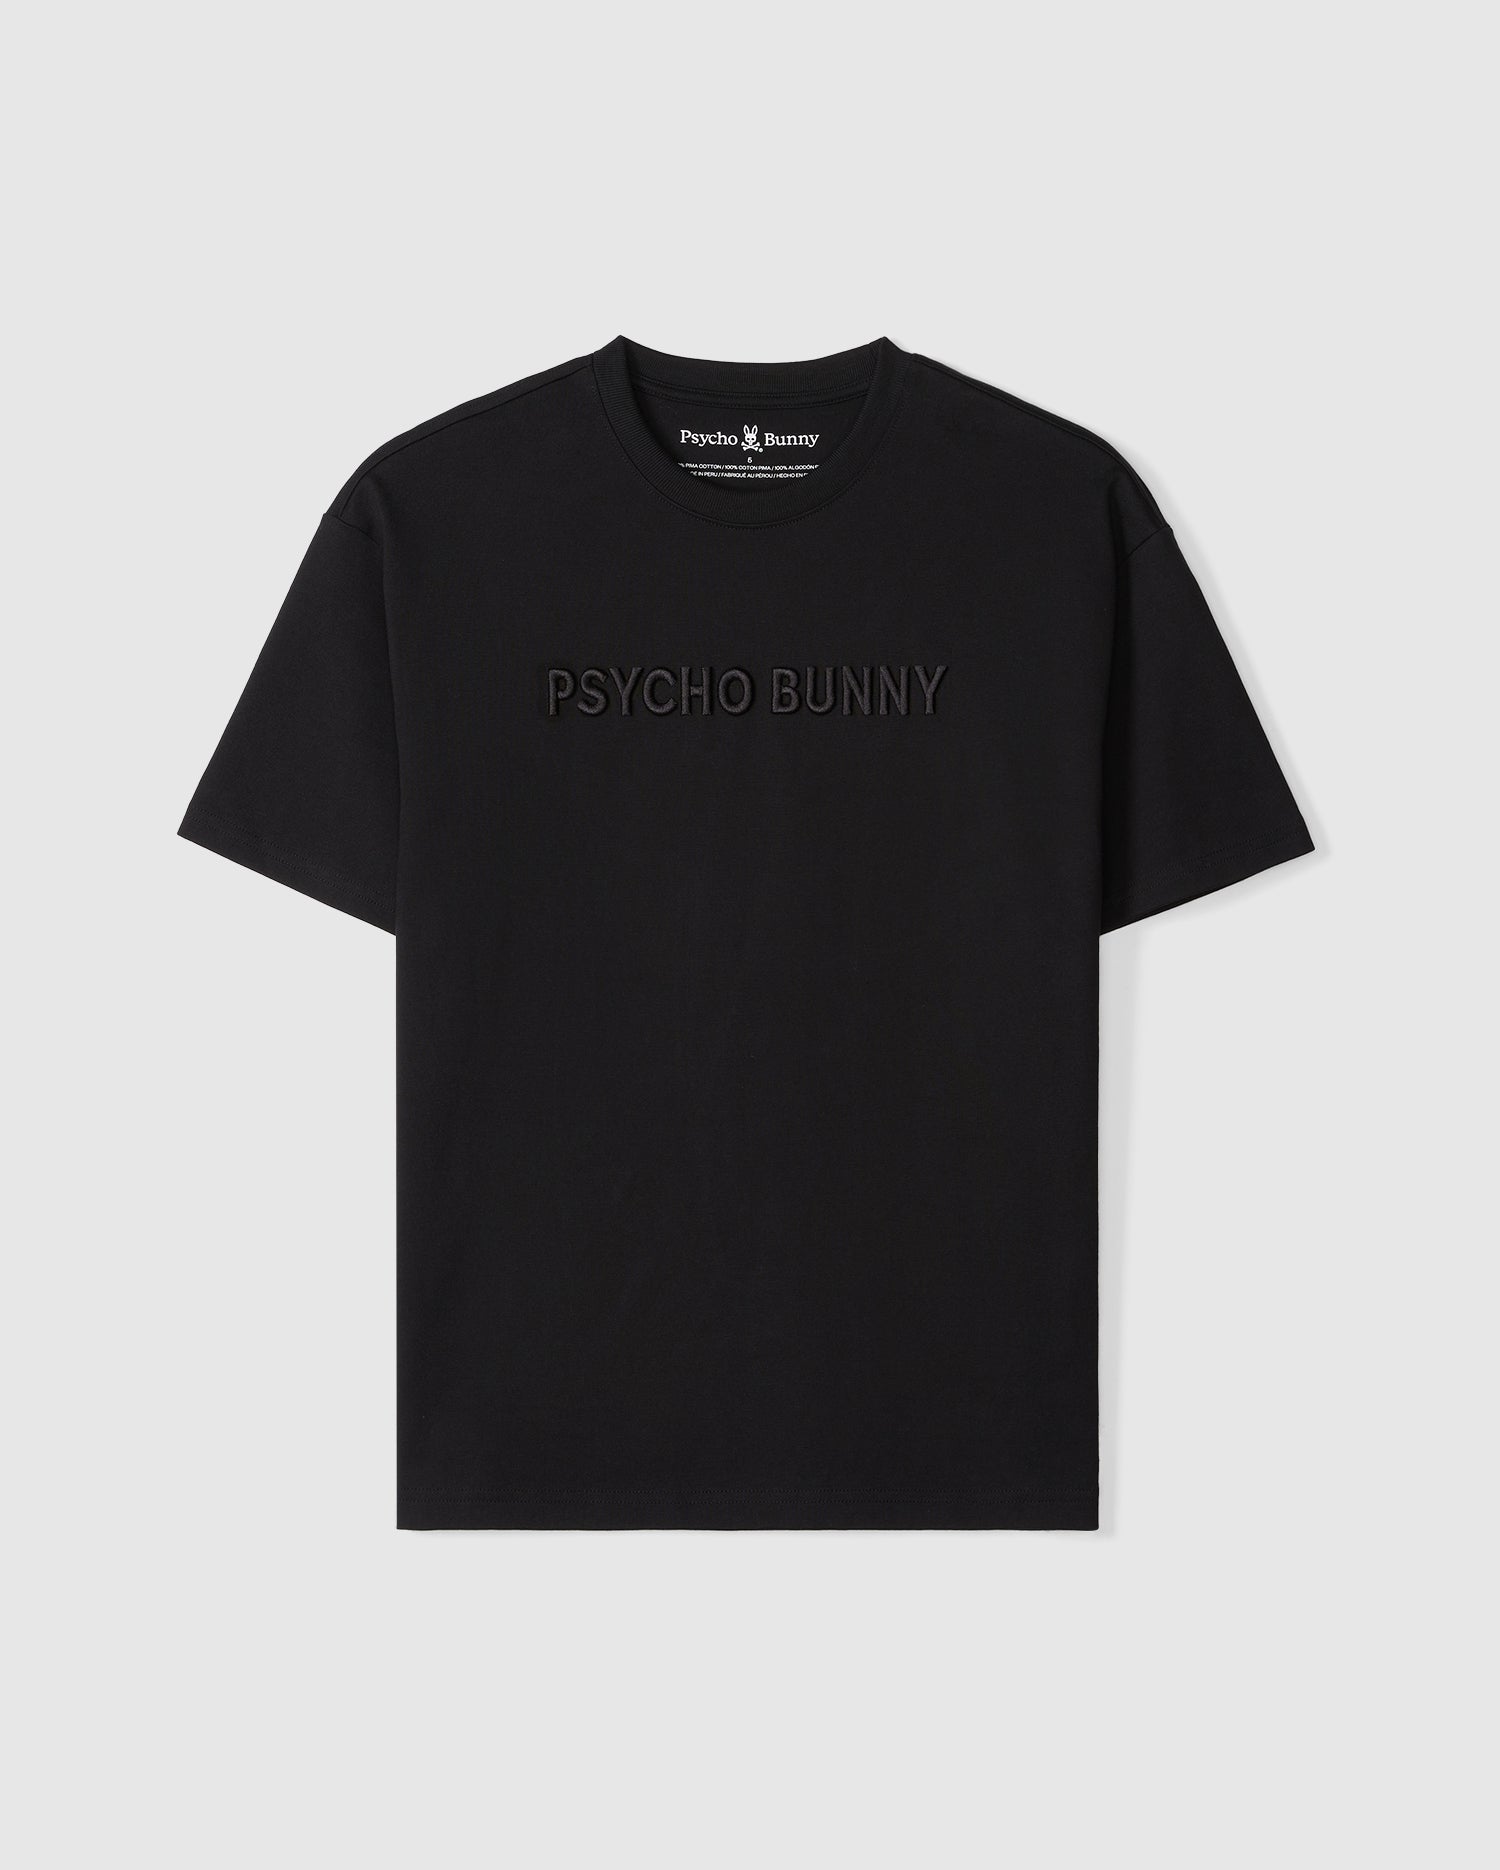 A Psycho Bunny MENS WINDCREST HEAVY WEIGHT TEE - B6U593C200 with the words 